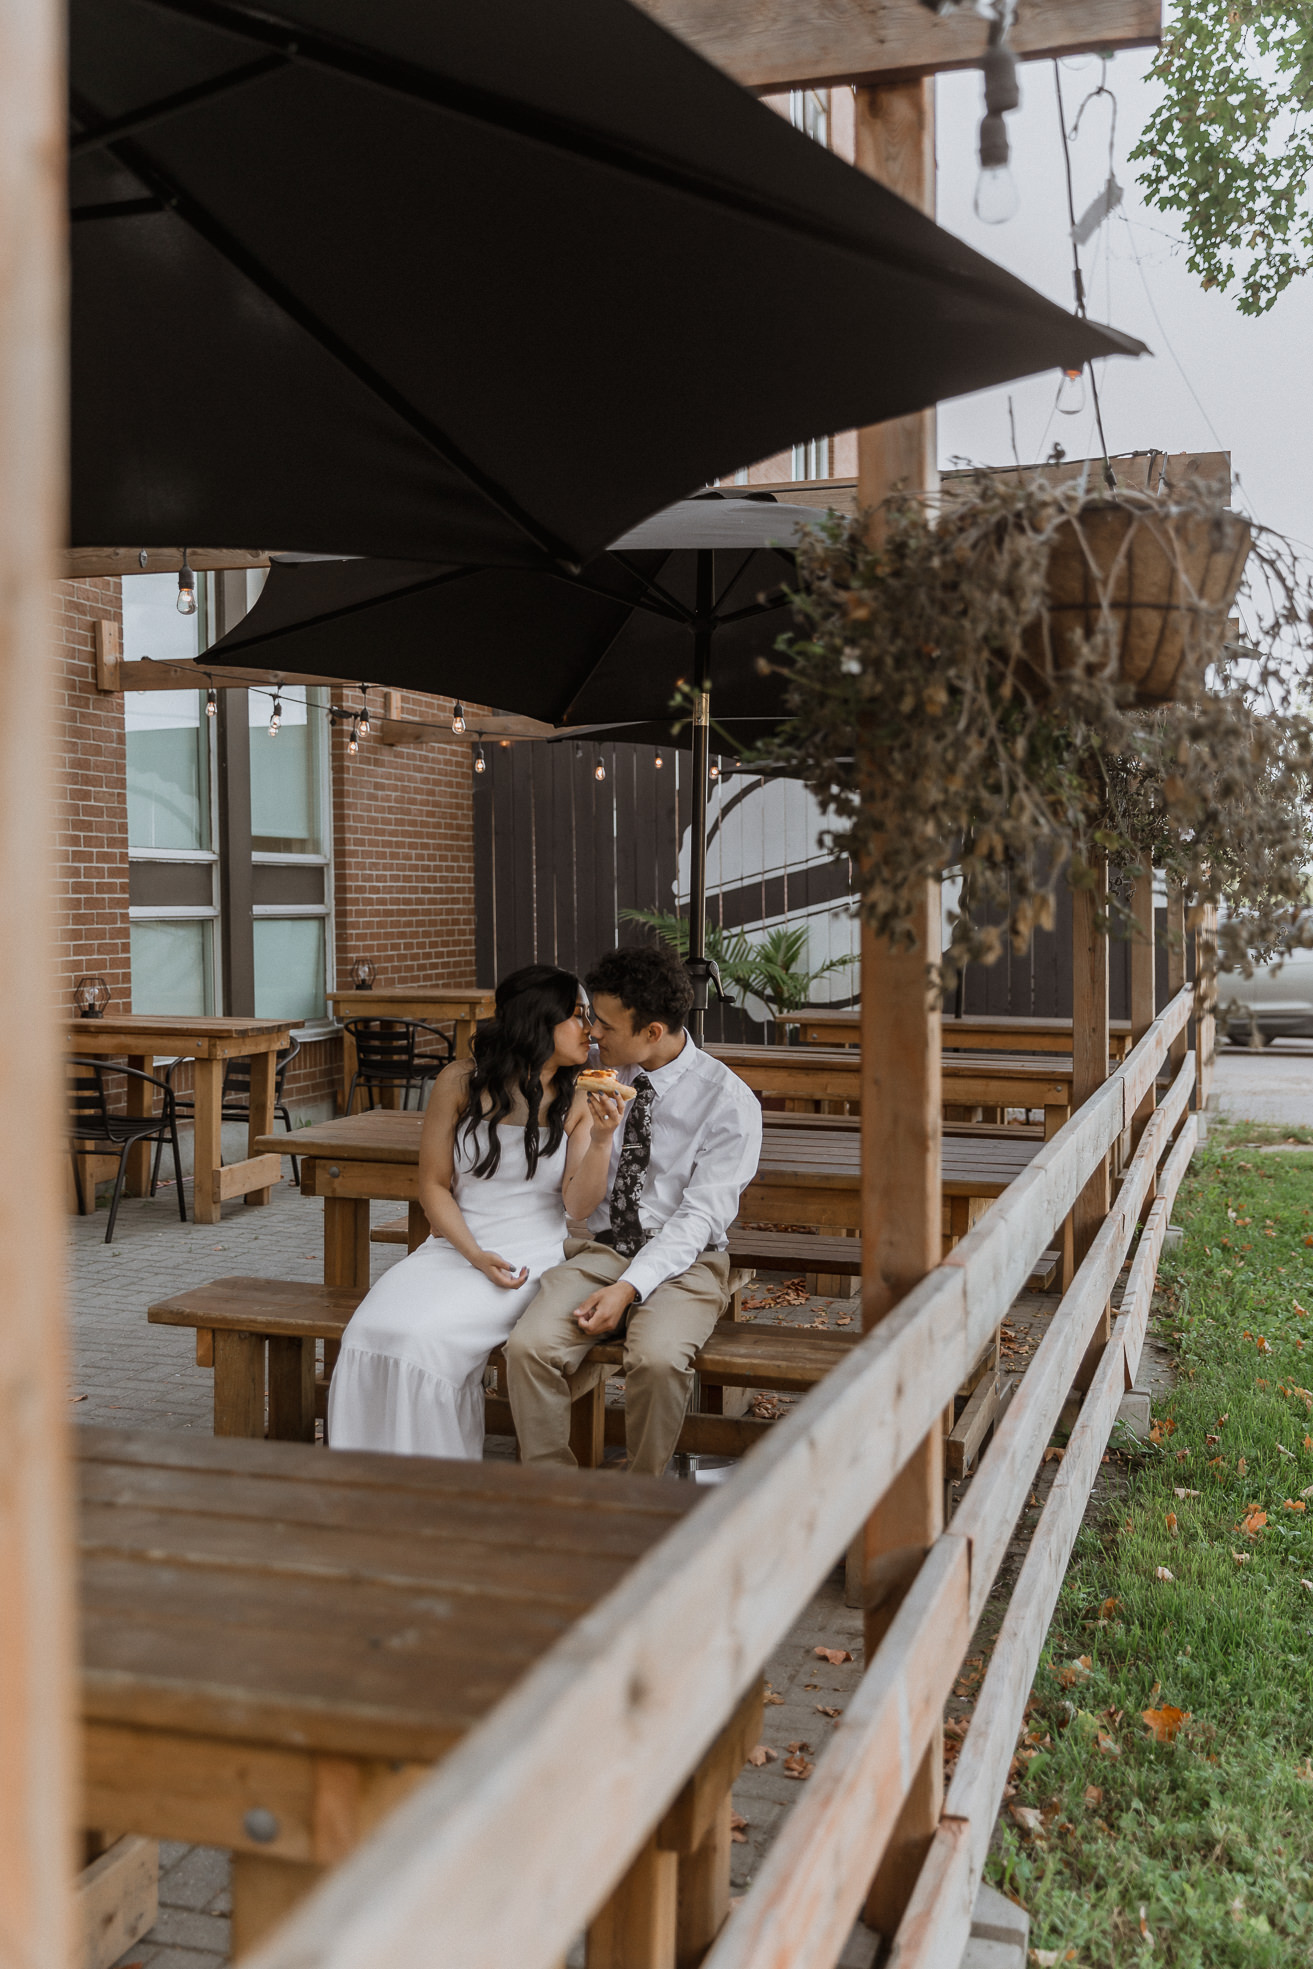 bride and groom eating pizza at patio - Sonia V Photo -Documentary Style Candid Photographer - Ottawa Ontario Kemptville Destination Photographer - Authentic Colour Photography - Wedding Photographer - Branding Photographer - Small Business Headshots - Engagement Photos - Family Portraits - Lifestyle